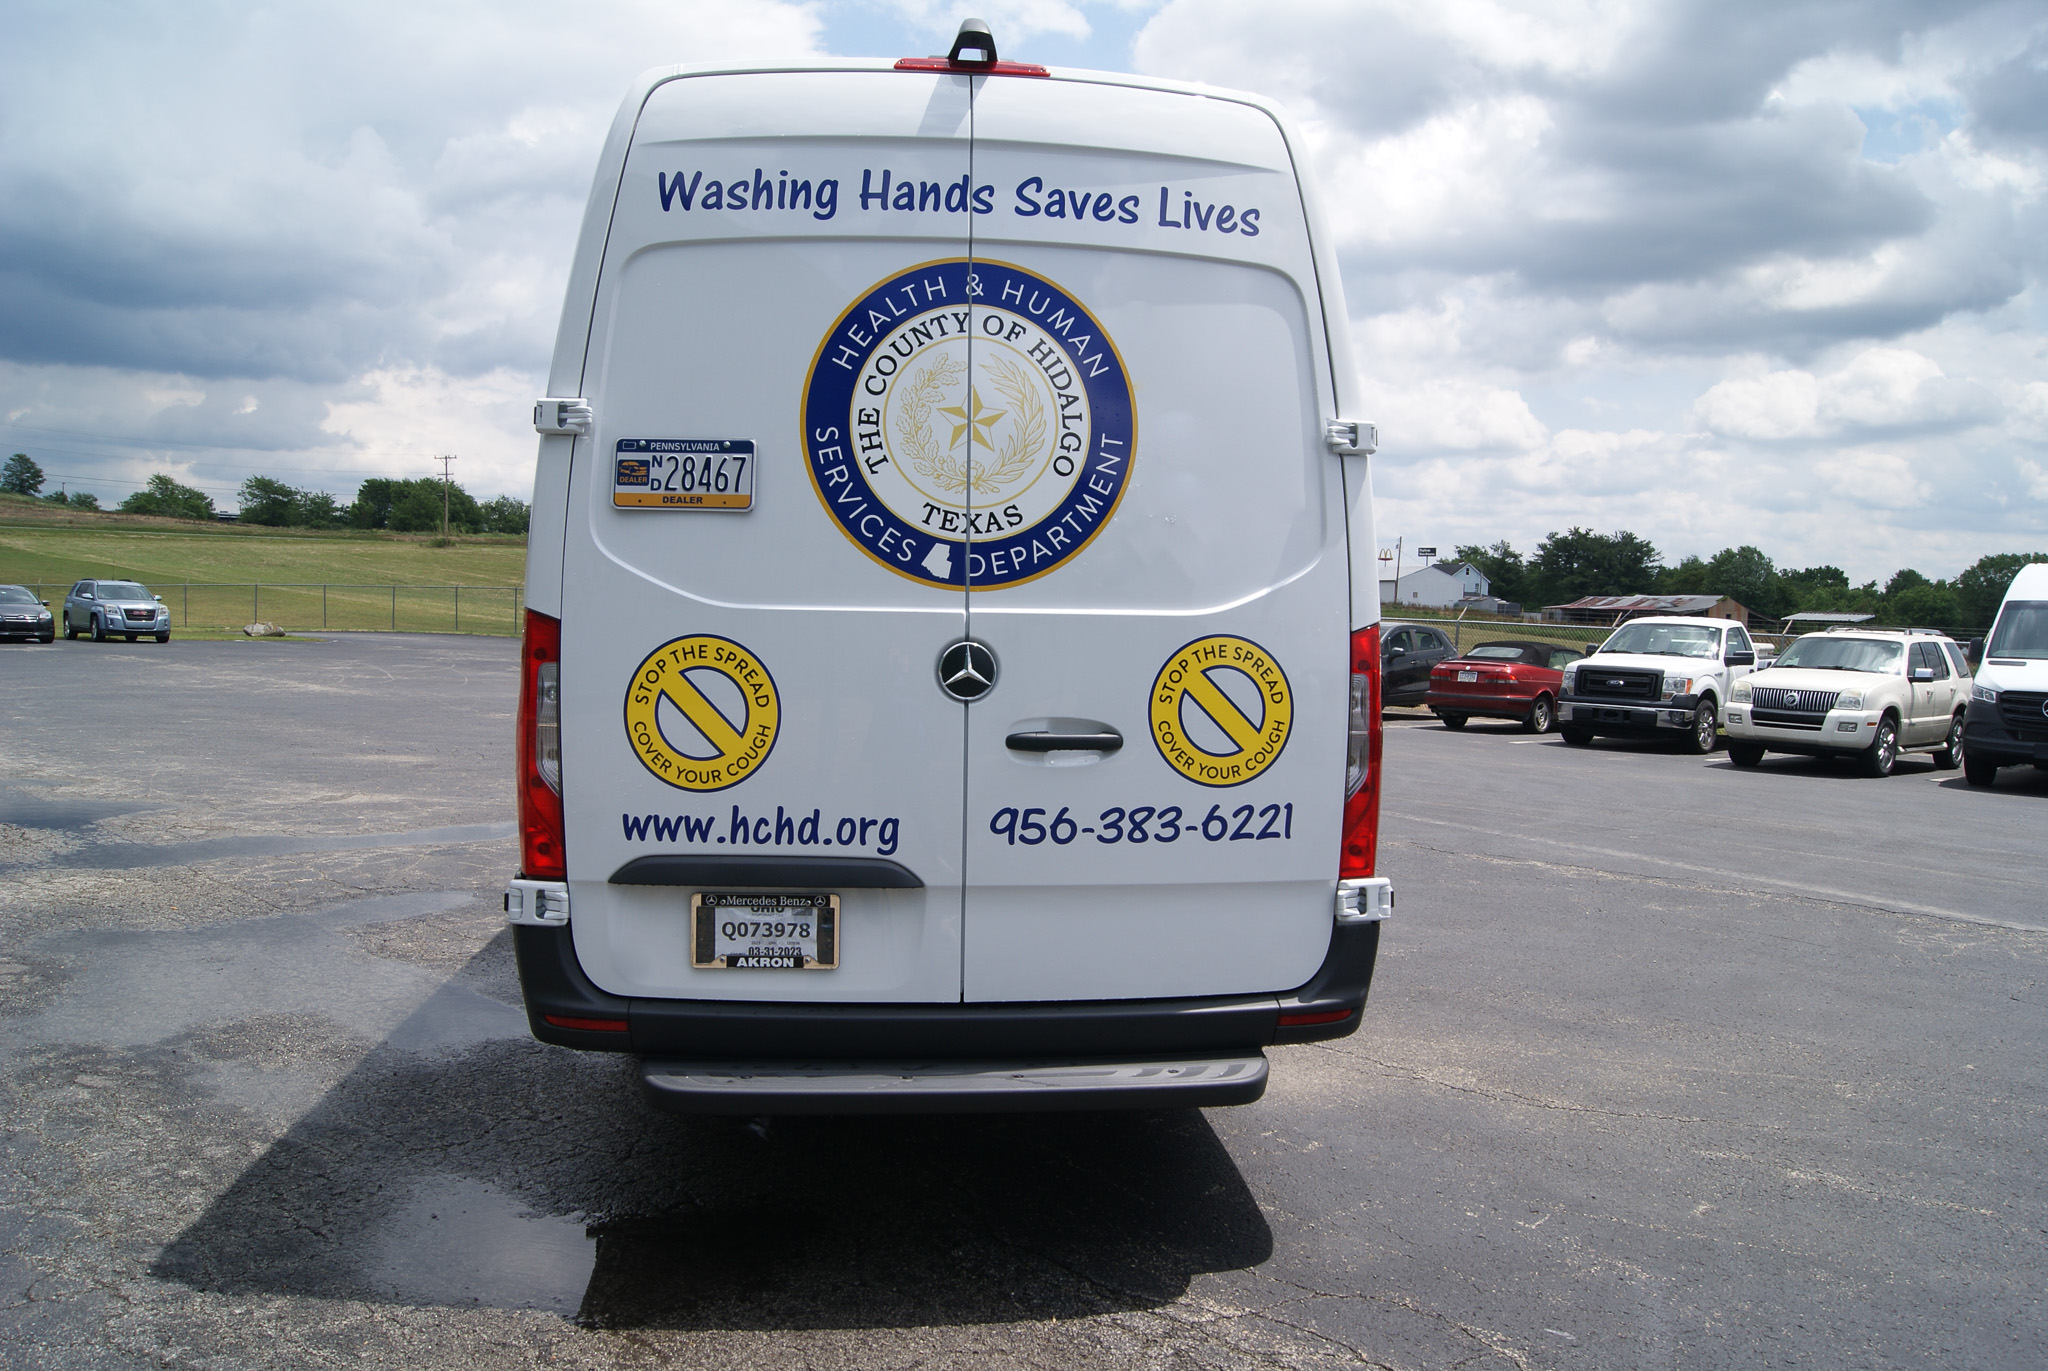 A direct view of the Mobile Medical Exam sprinter's back door decals.